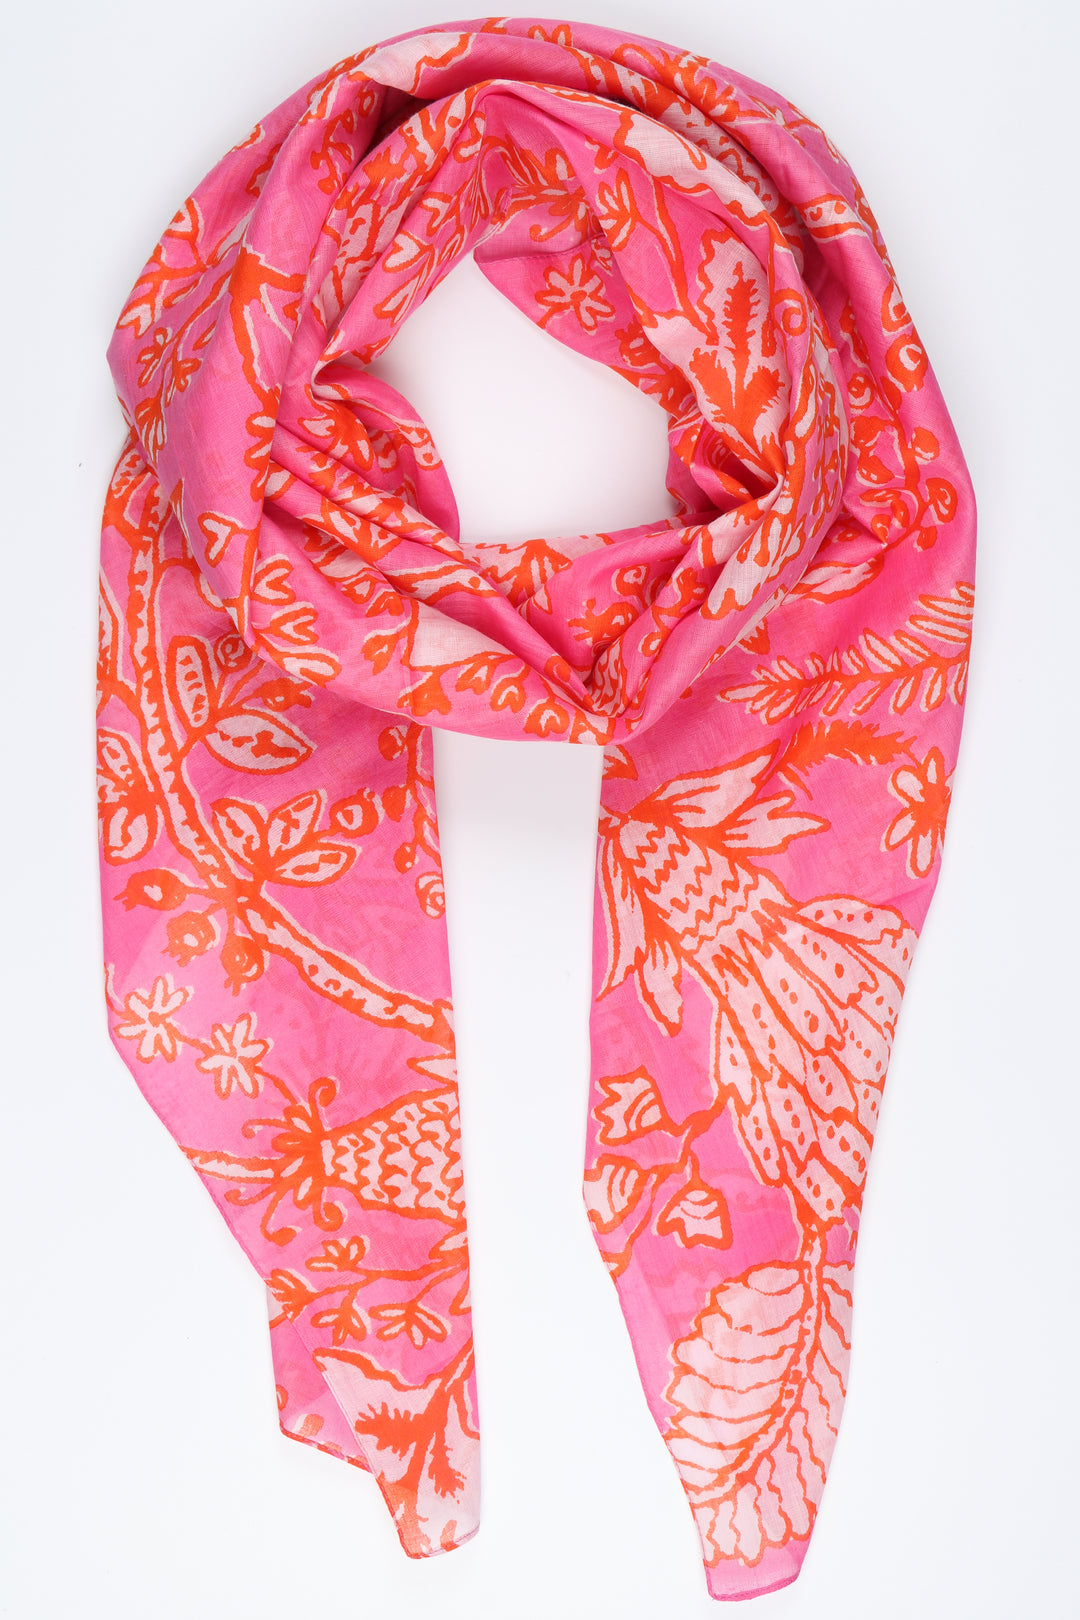 Delicate Floral Print Cotton Scarf in Hot Pink